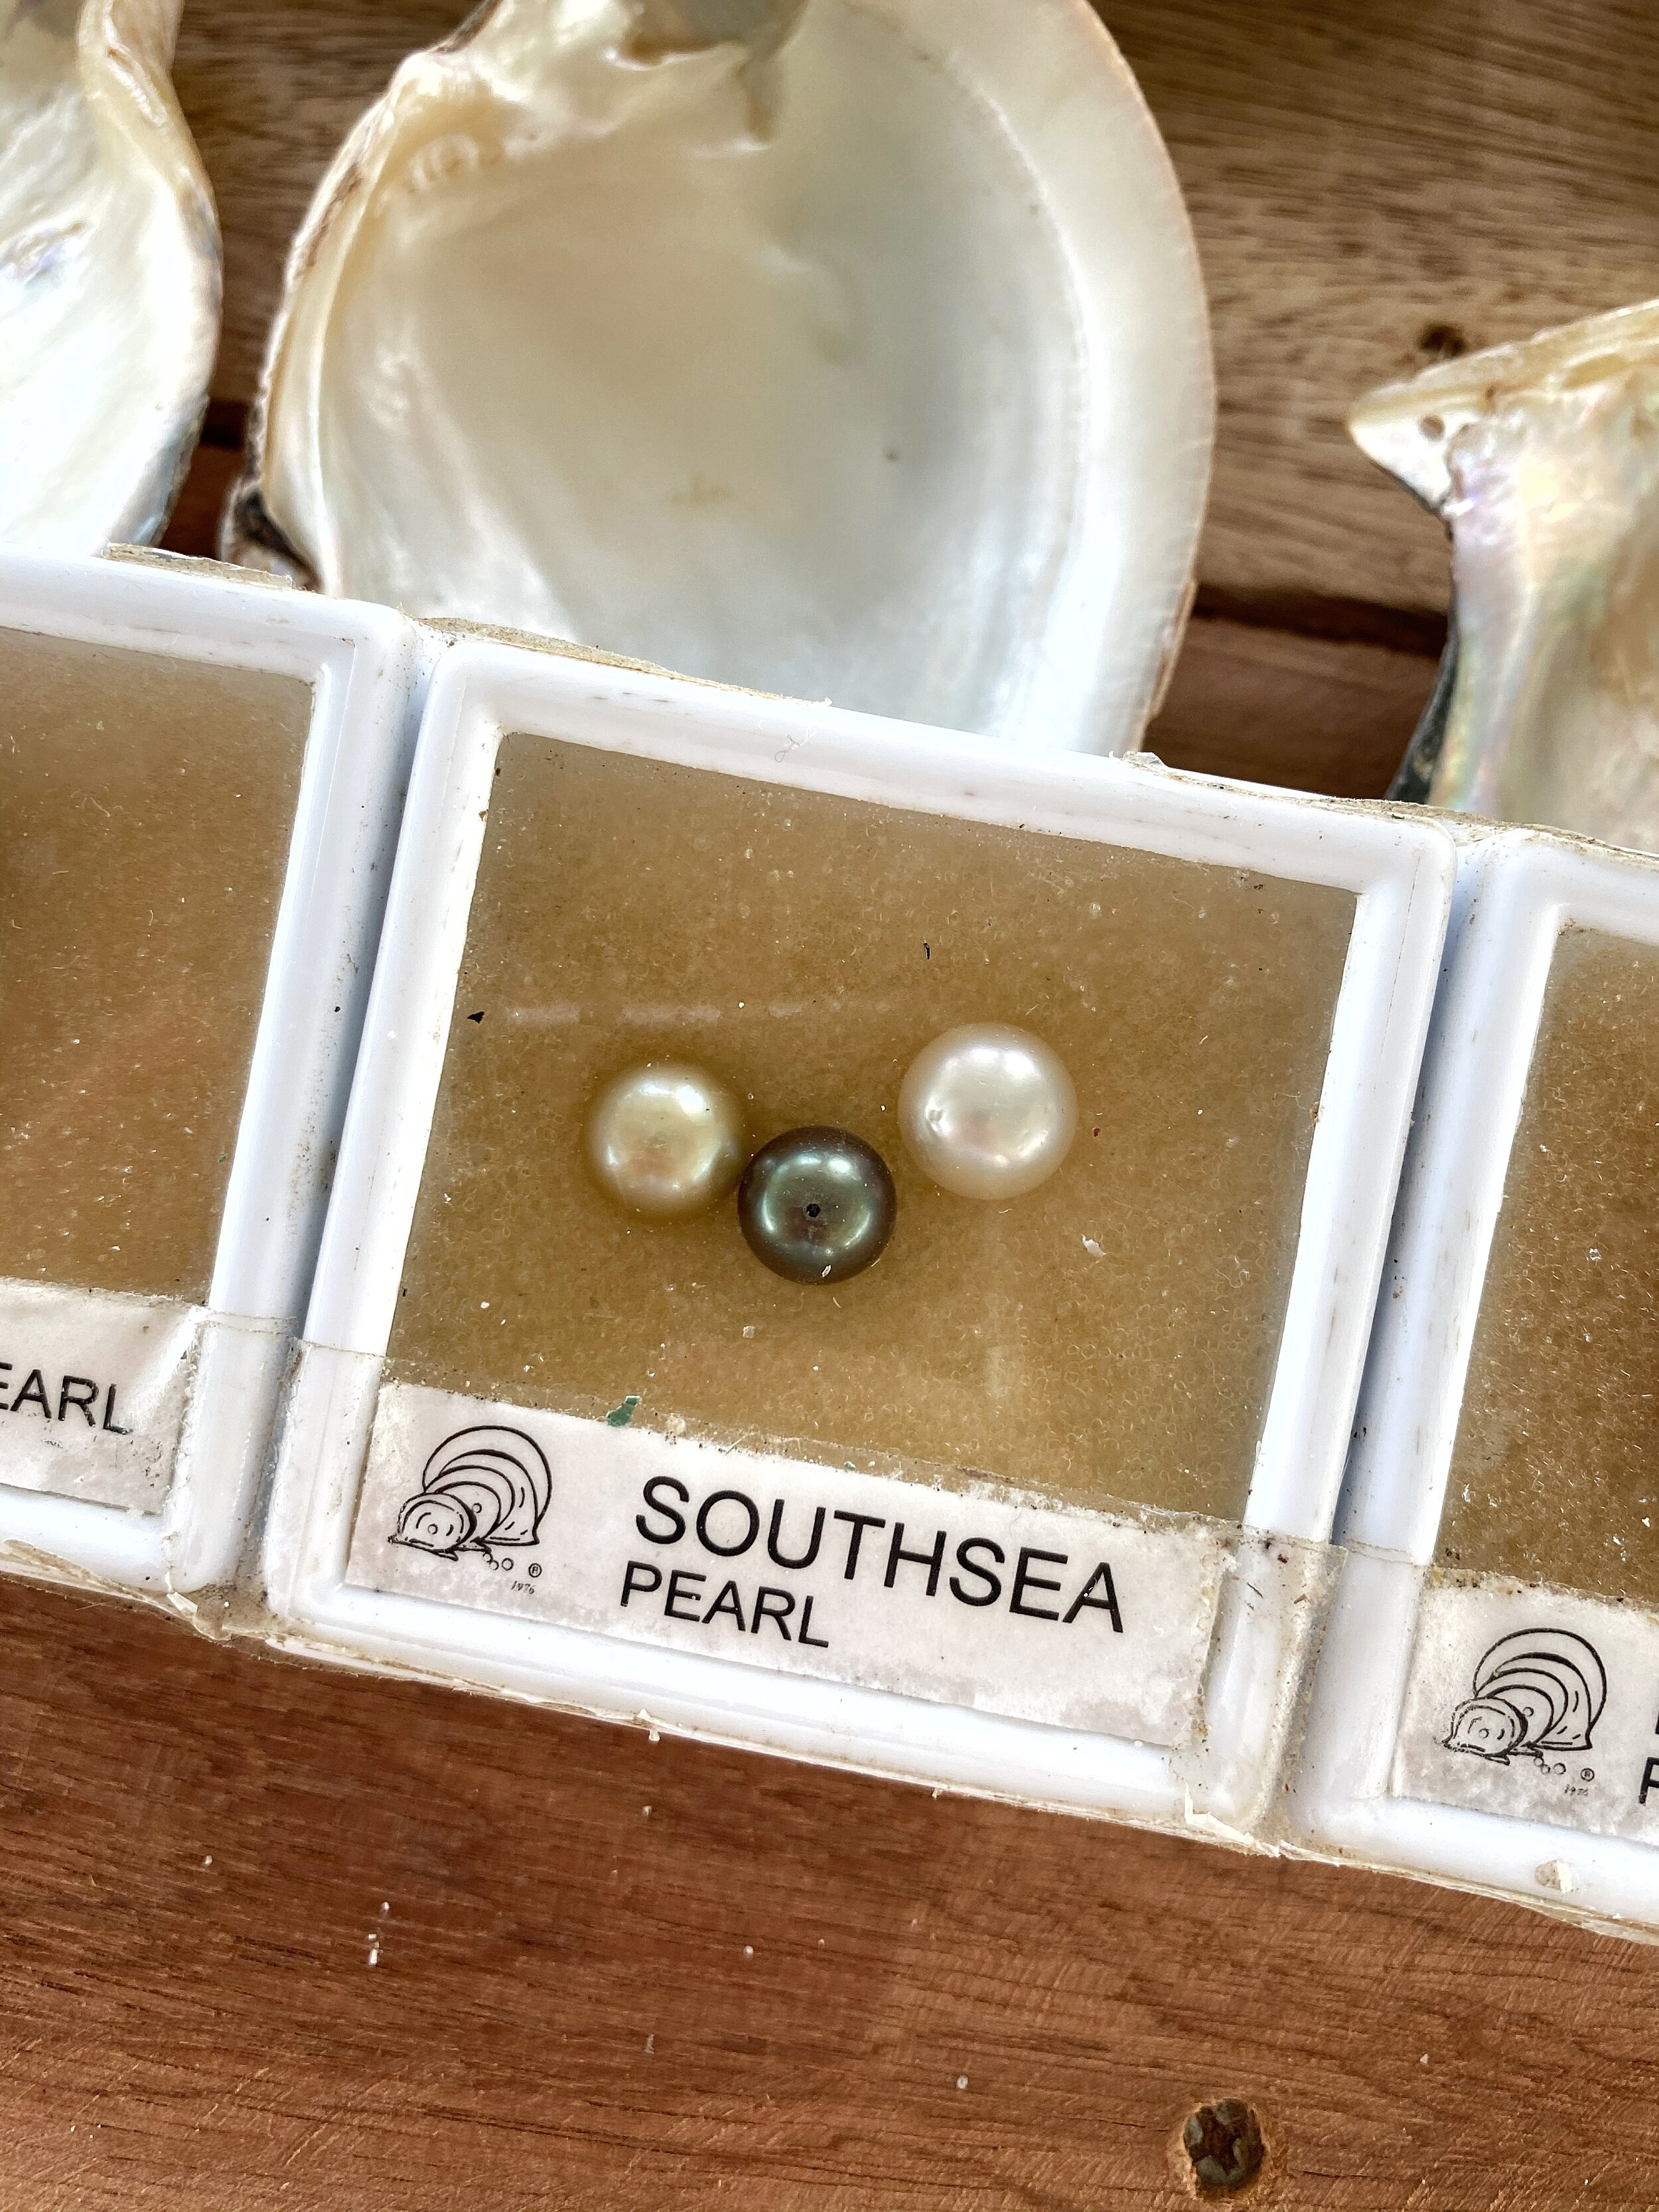 The larger, most rare of all the pearls: South Sea.